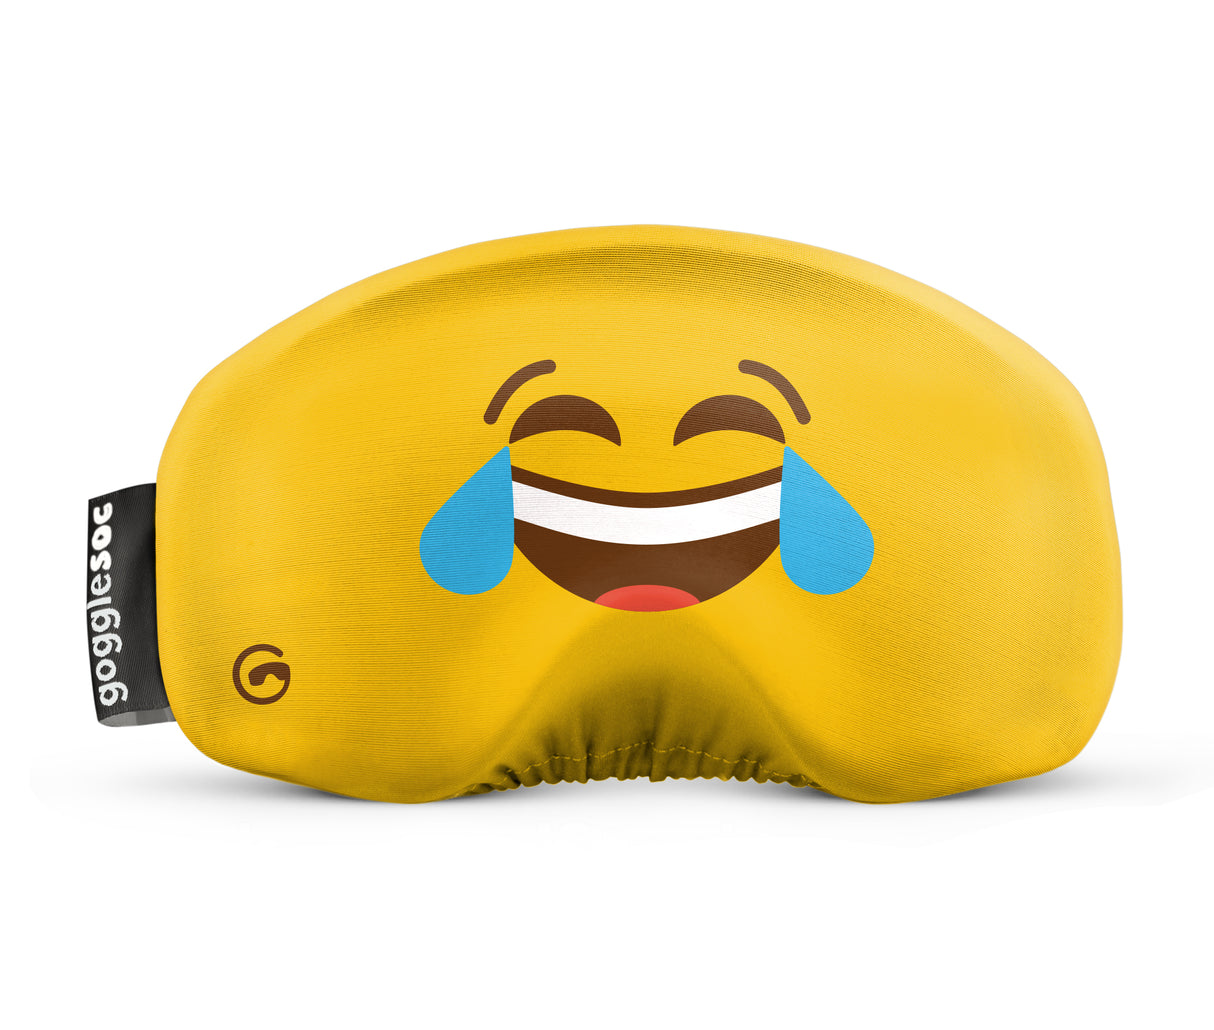 Created by GOGGLESOC APPAREL LIMITED, the emoji gogglesocs is one of our signature gogglesocs's. The emoji gogglesocs is available throughout Canada and North America from dedicated stockists or online.